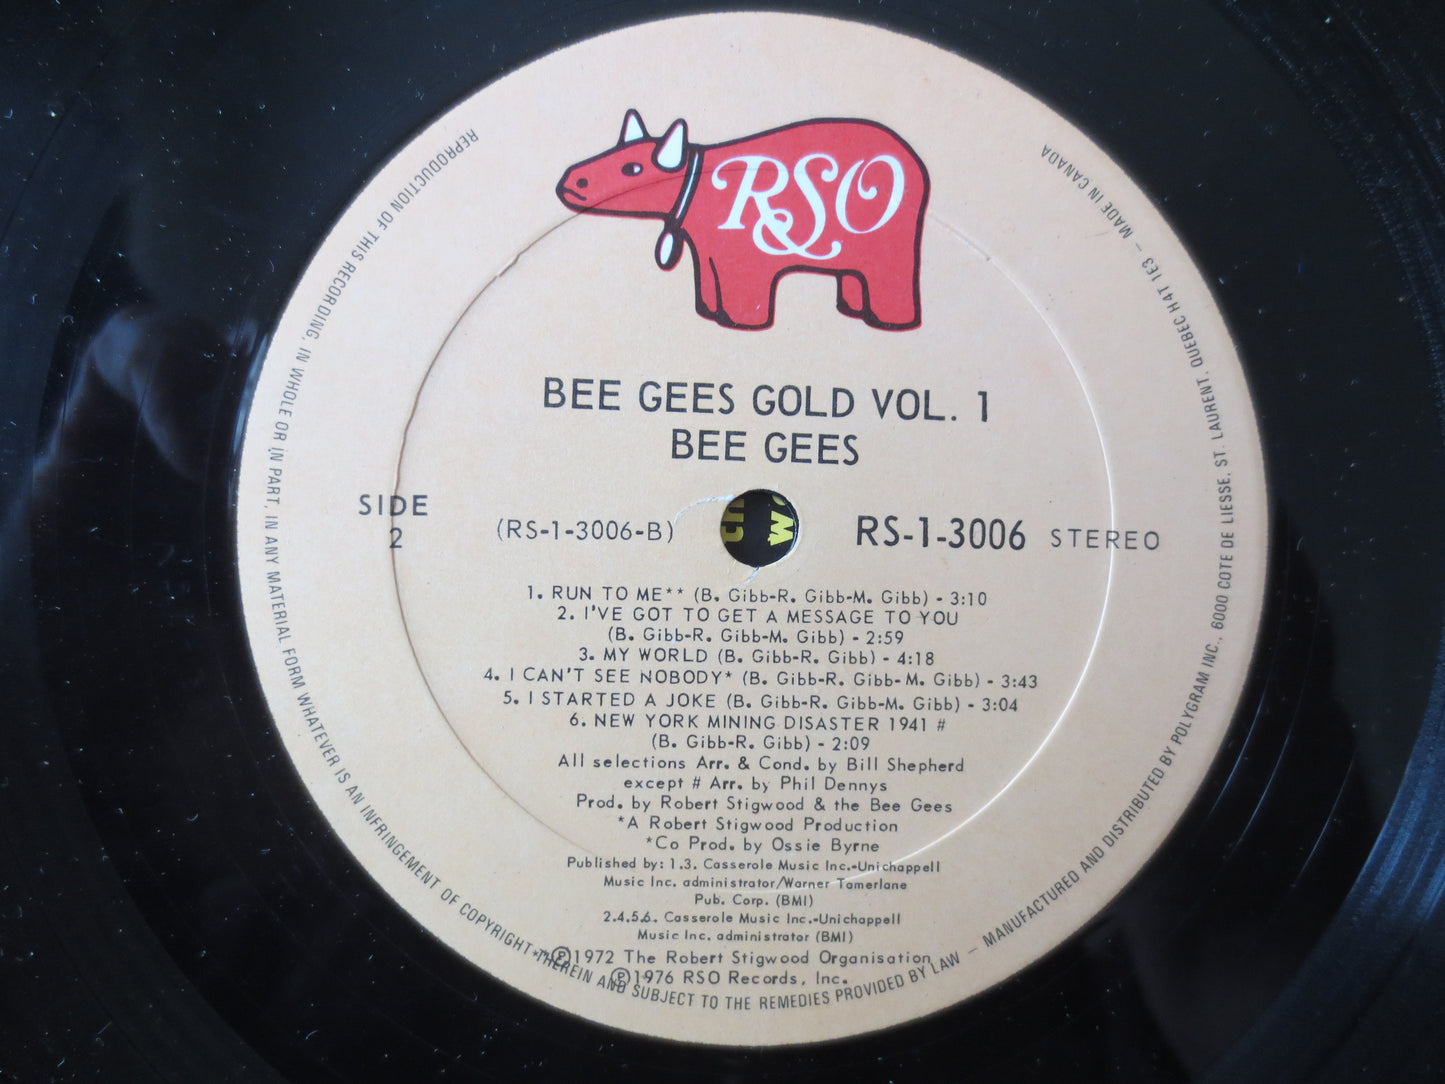 The BEE GEES, GOLD, Vol 1, The Bee Gees Records, The Bee Gees lps, Vintage Vinyl, Record Vinyl, Vinyl Record, 1976 Records